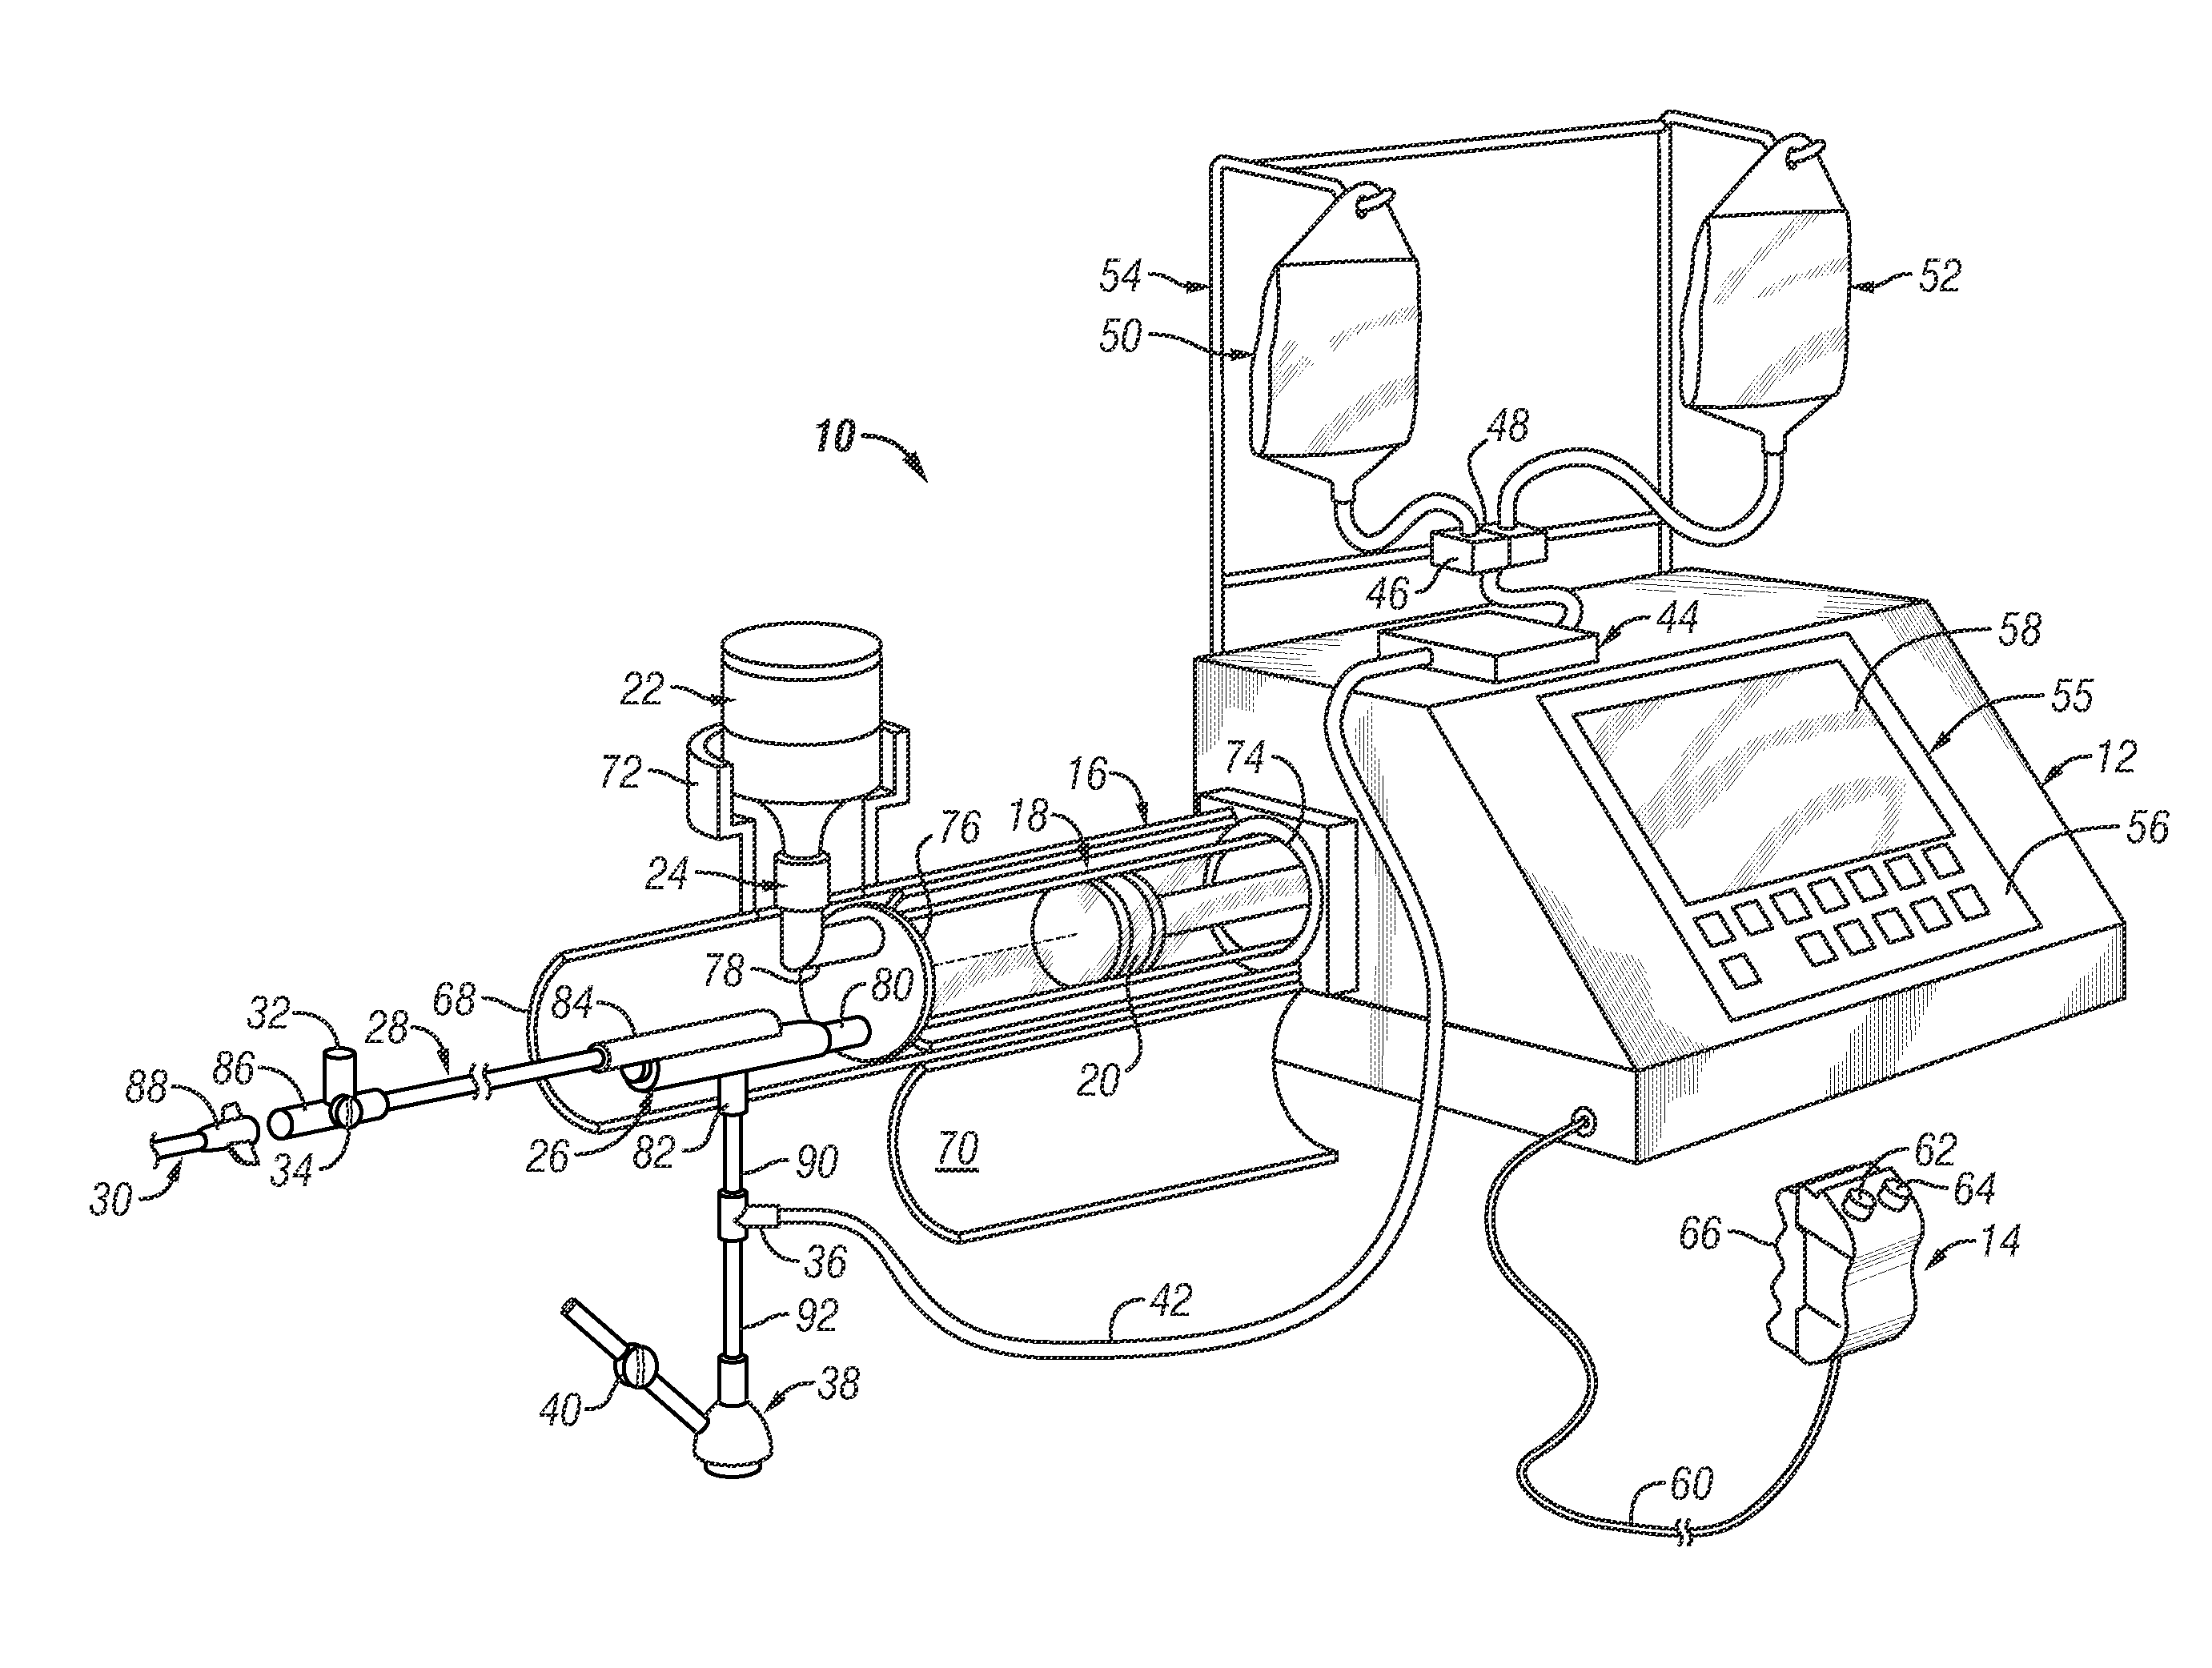 System and method for multiple injection procedures on heart vessels